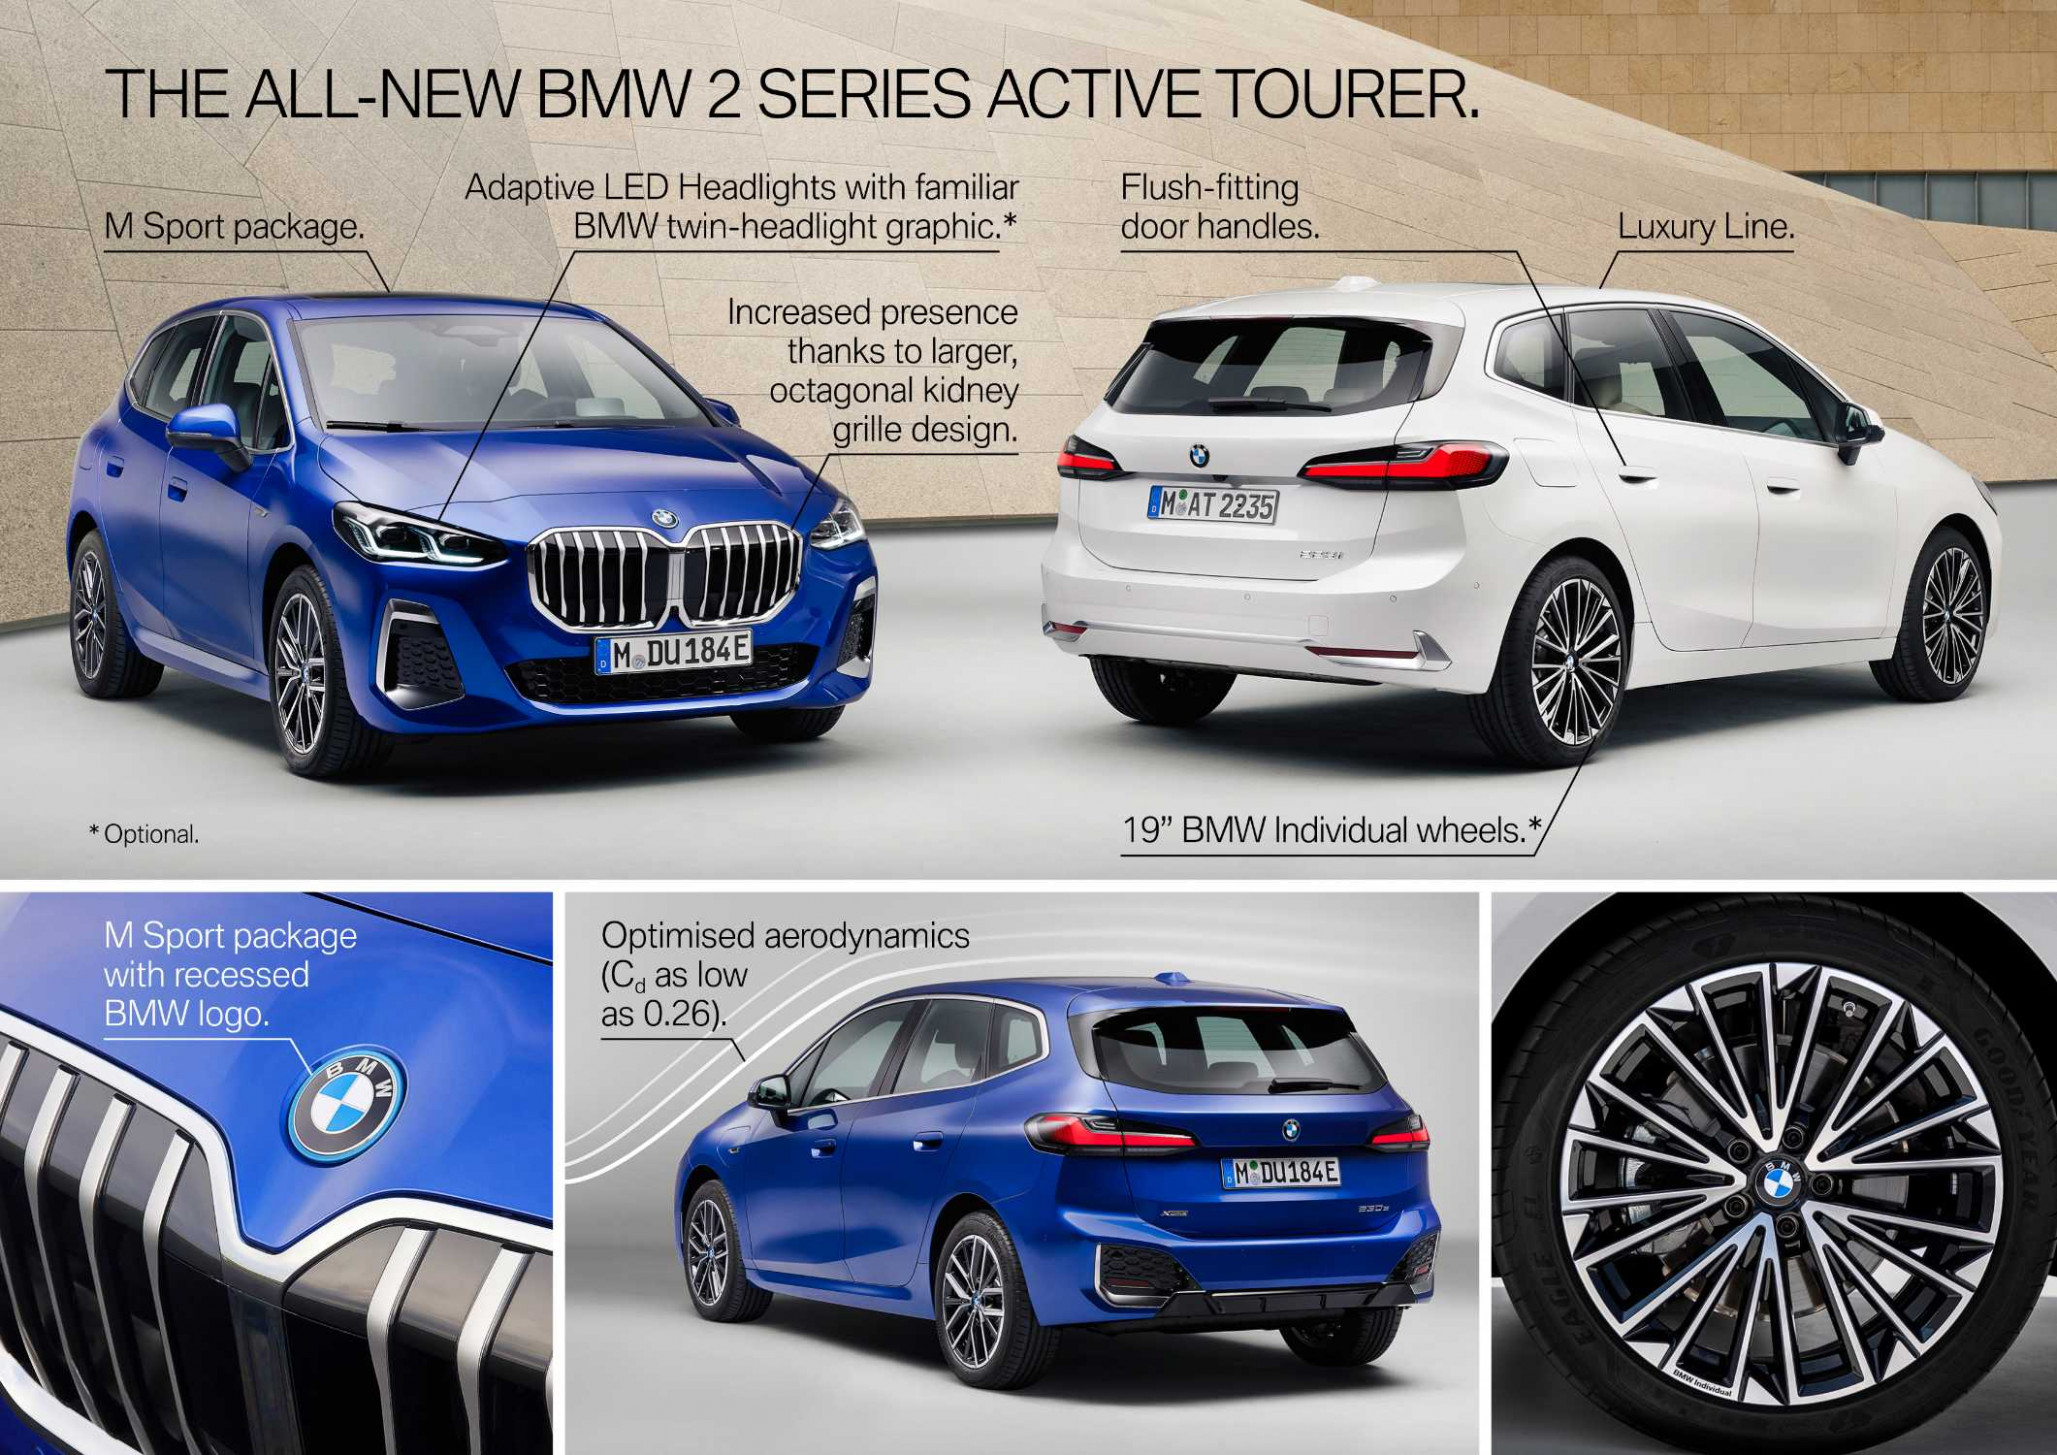 The all-new BMW 4 Series Active Tourer